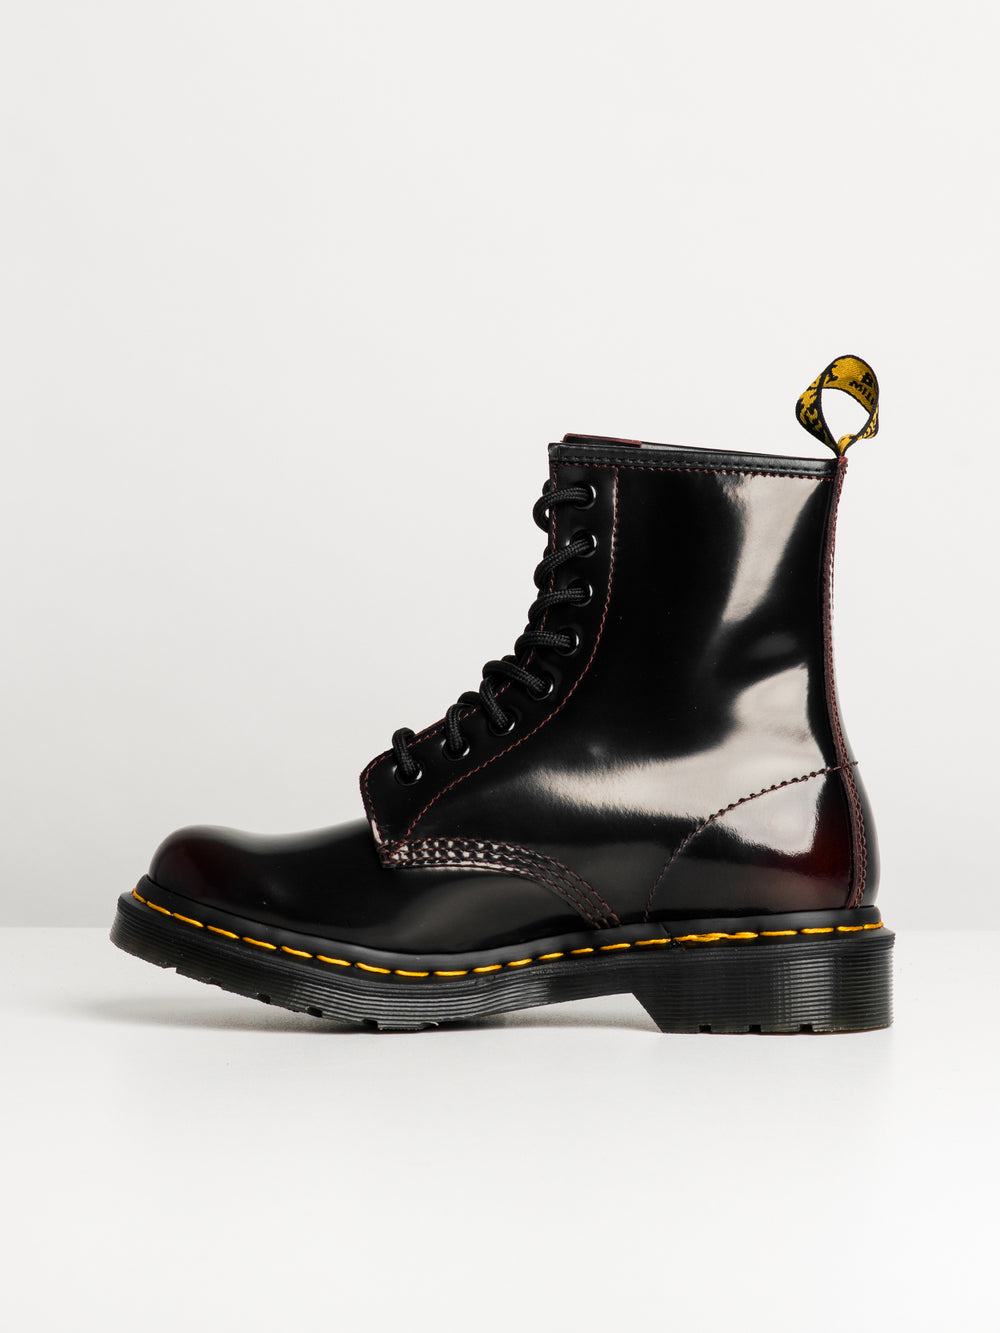 WOMENS DR MARTENS 1460 BOOT - CLEARANCE